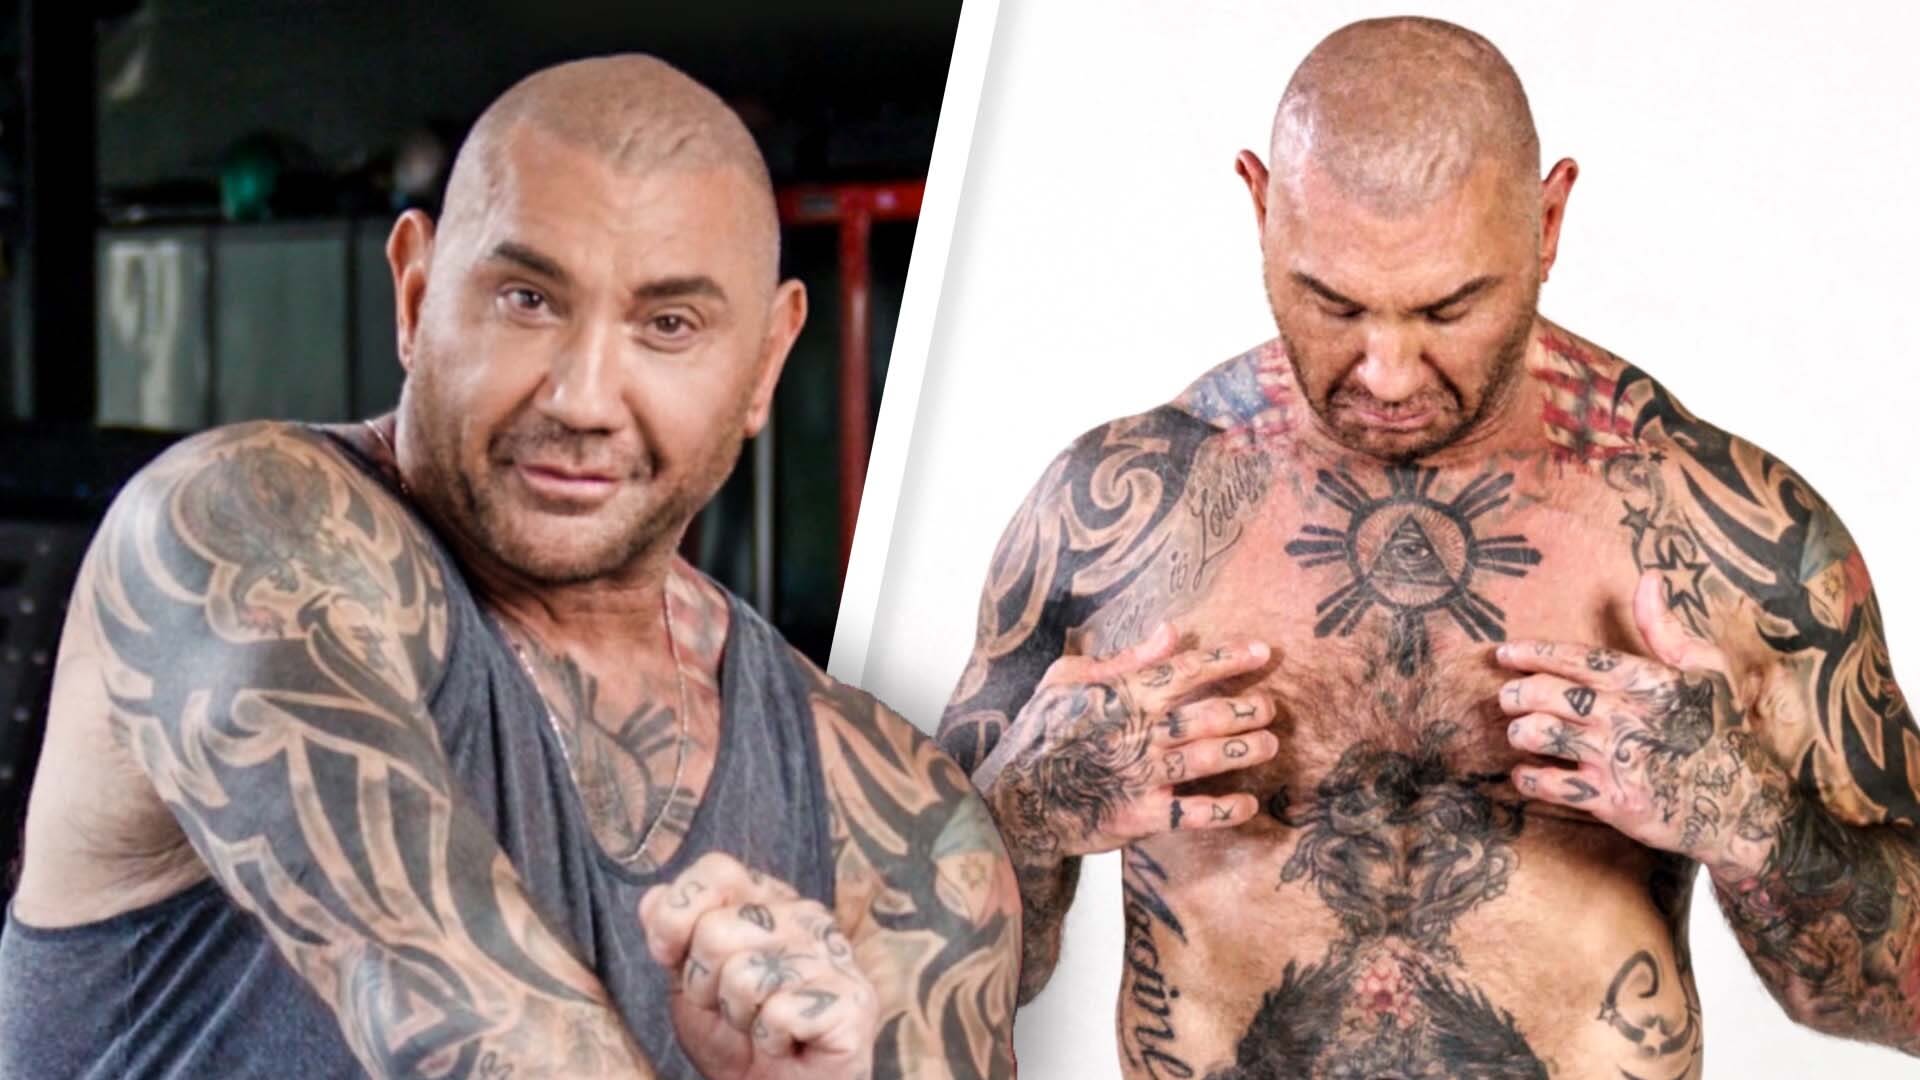 Dave bautista tattoo meaning